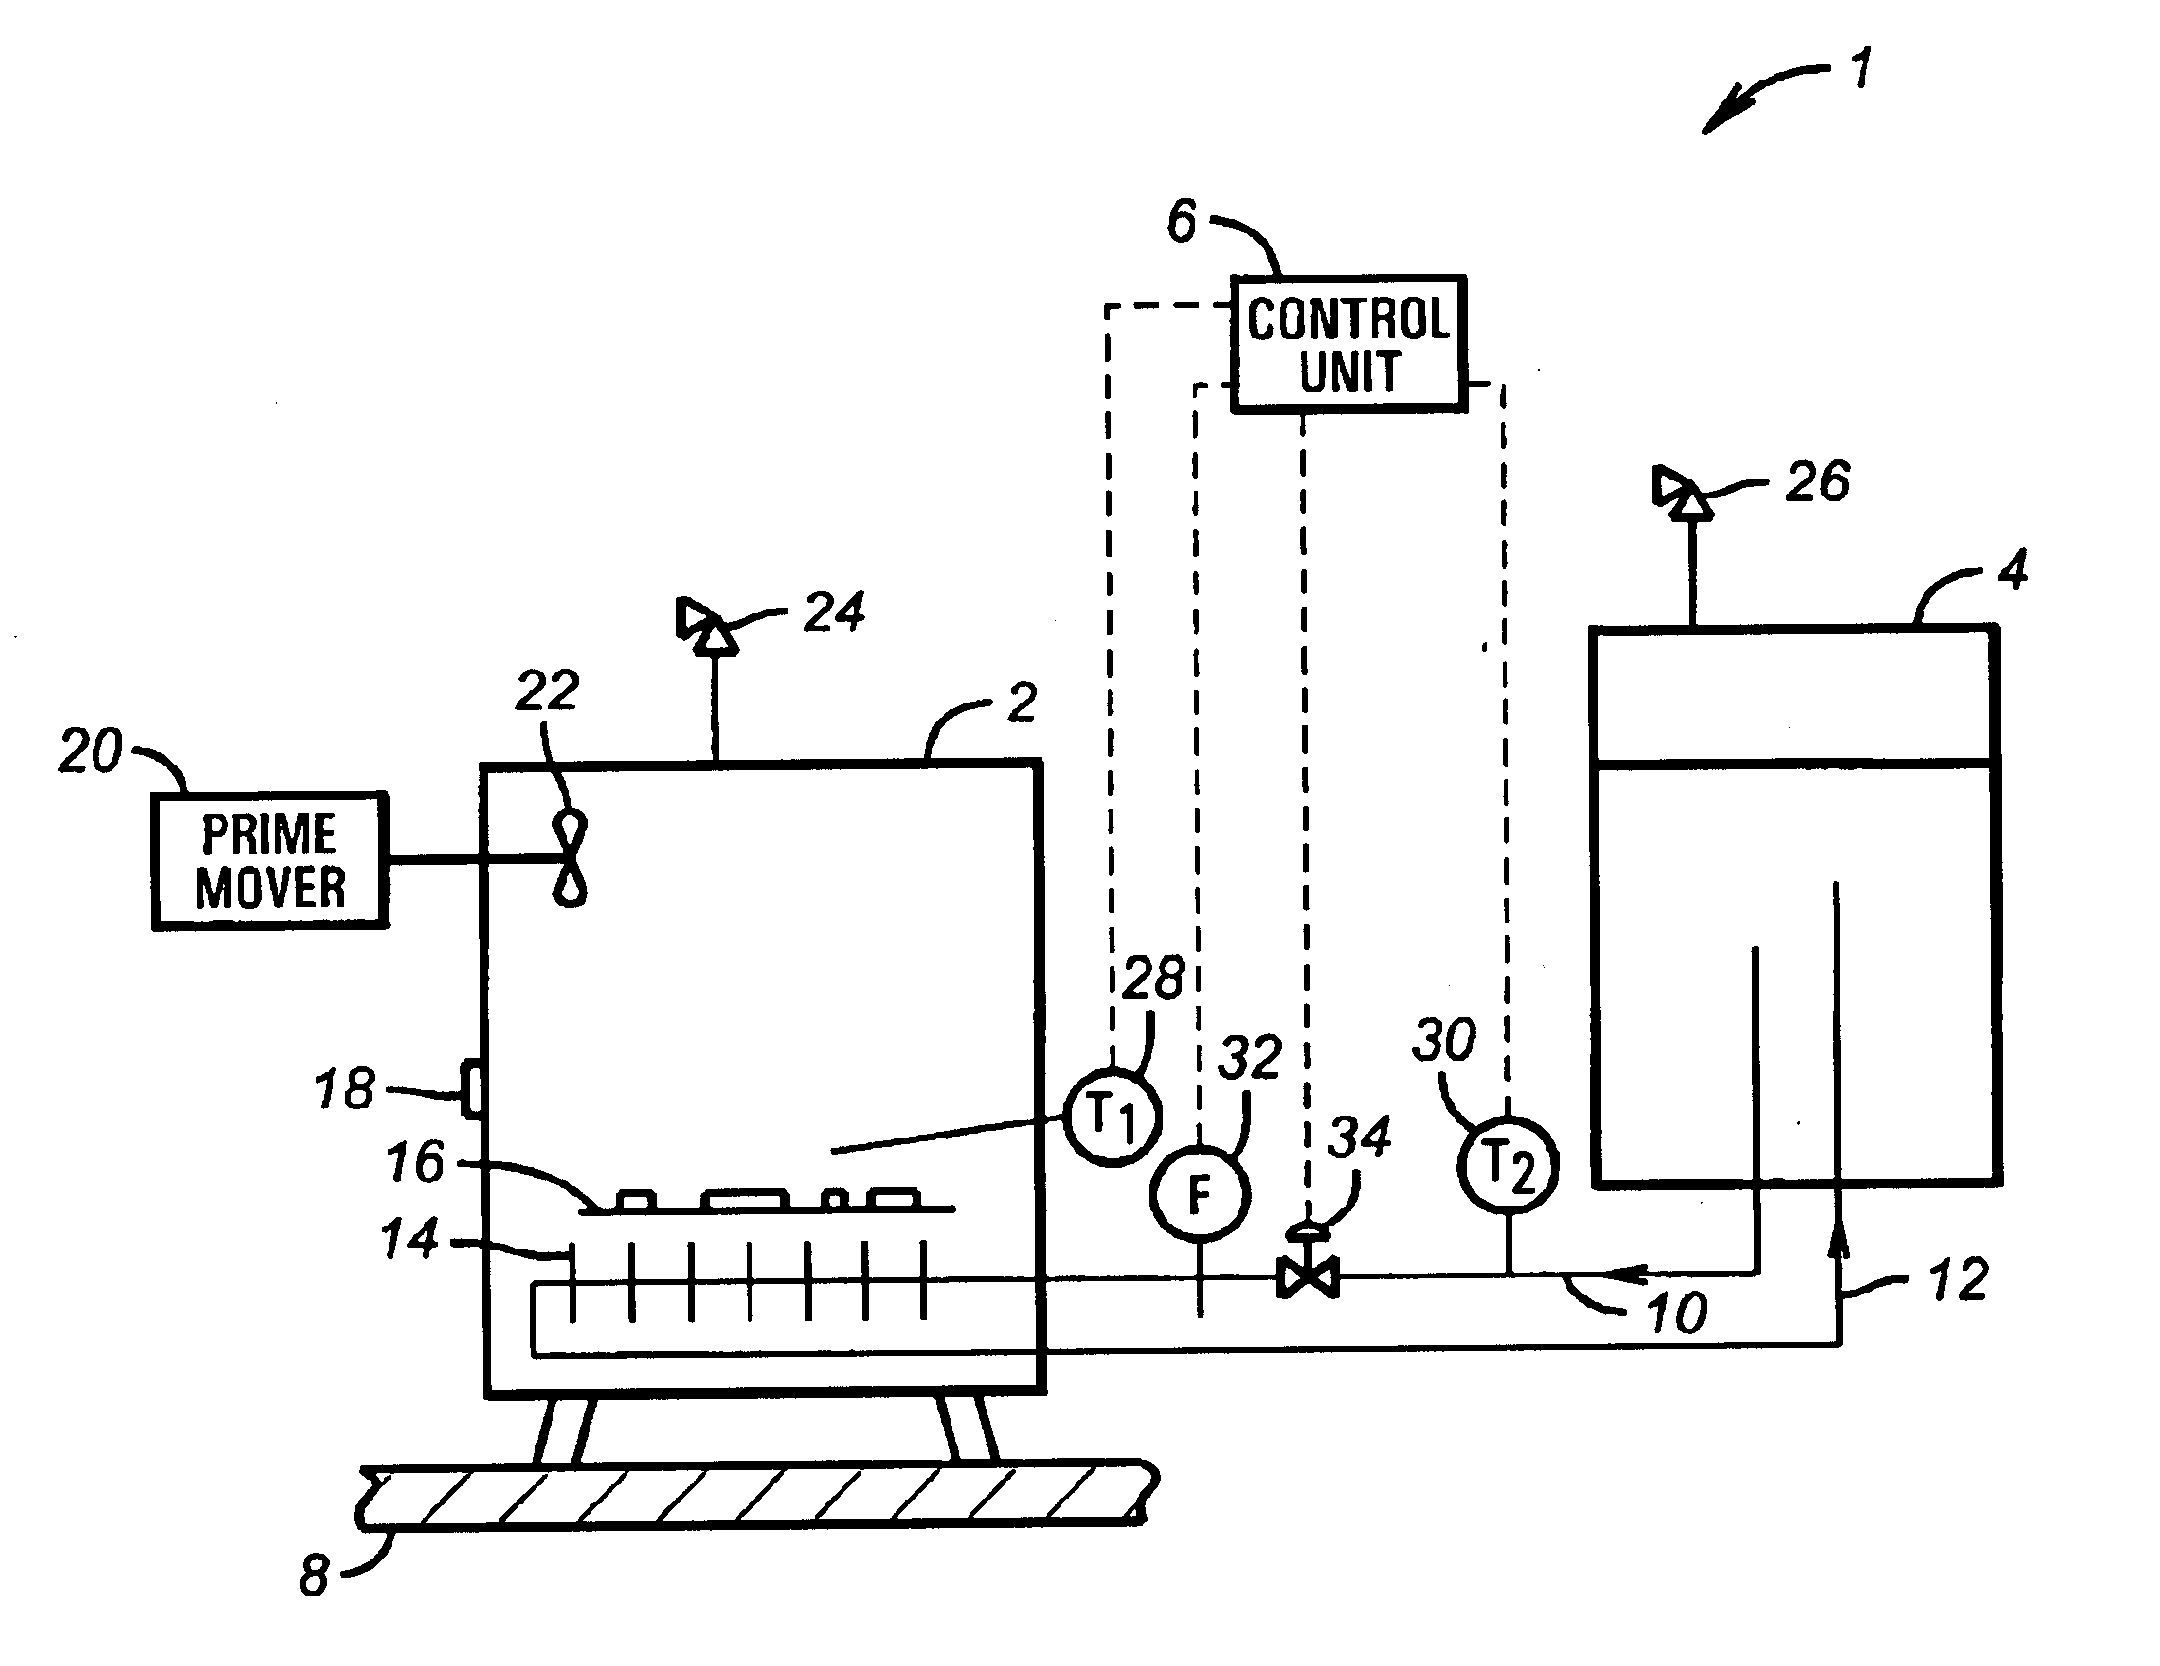 Methods and apparatus for recycling cryogenic liquid or gas from test chambers